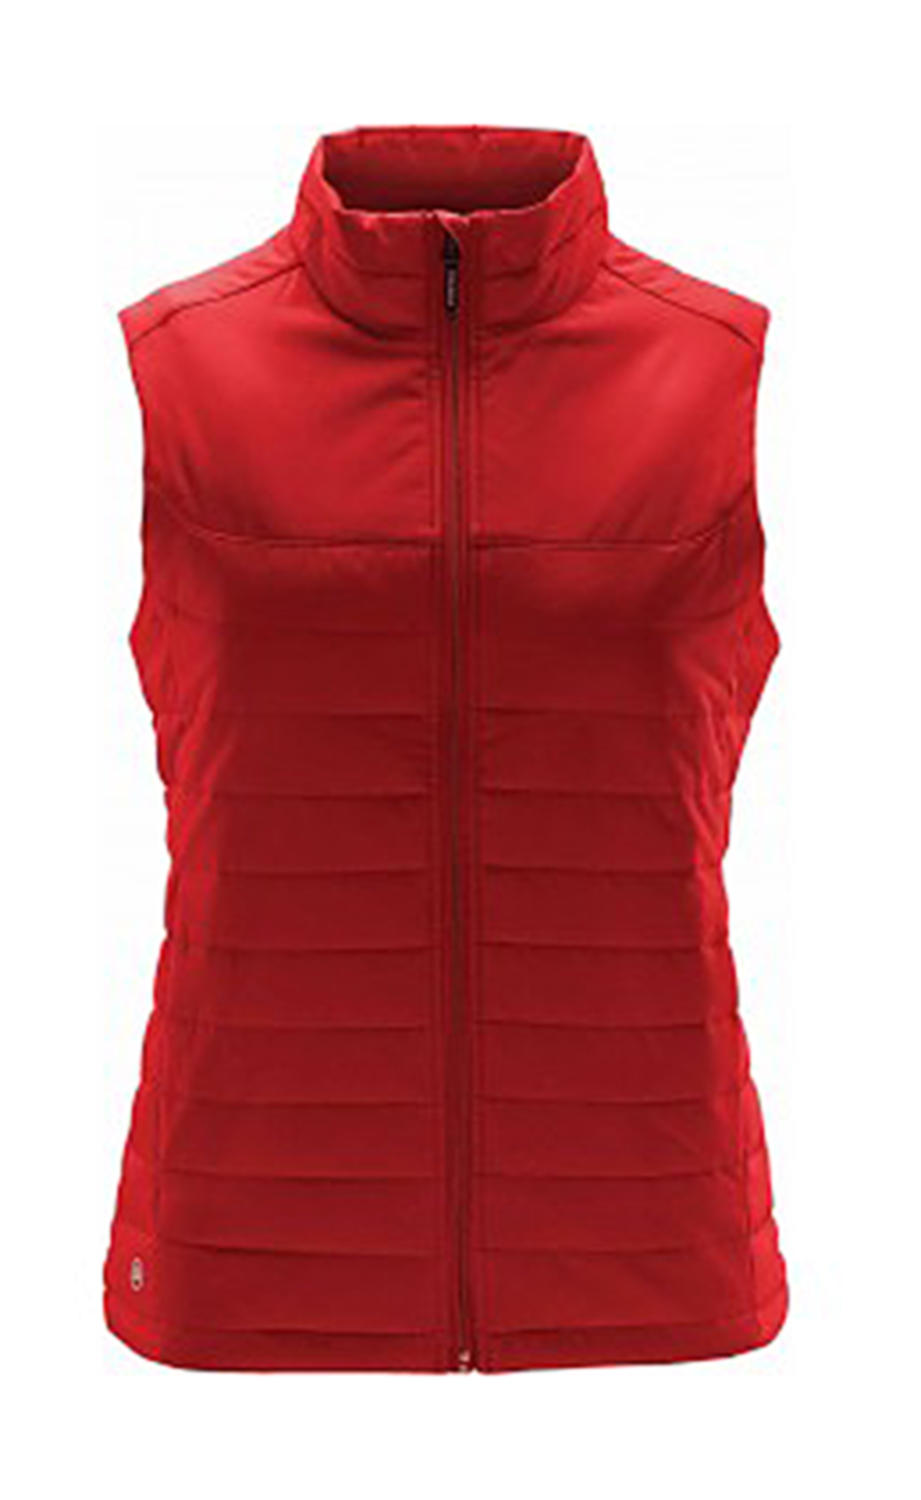  Womens Nautilus Thermal Bodywarmer  in Farbe Bright Red